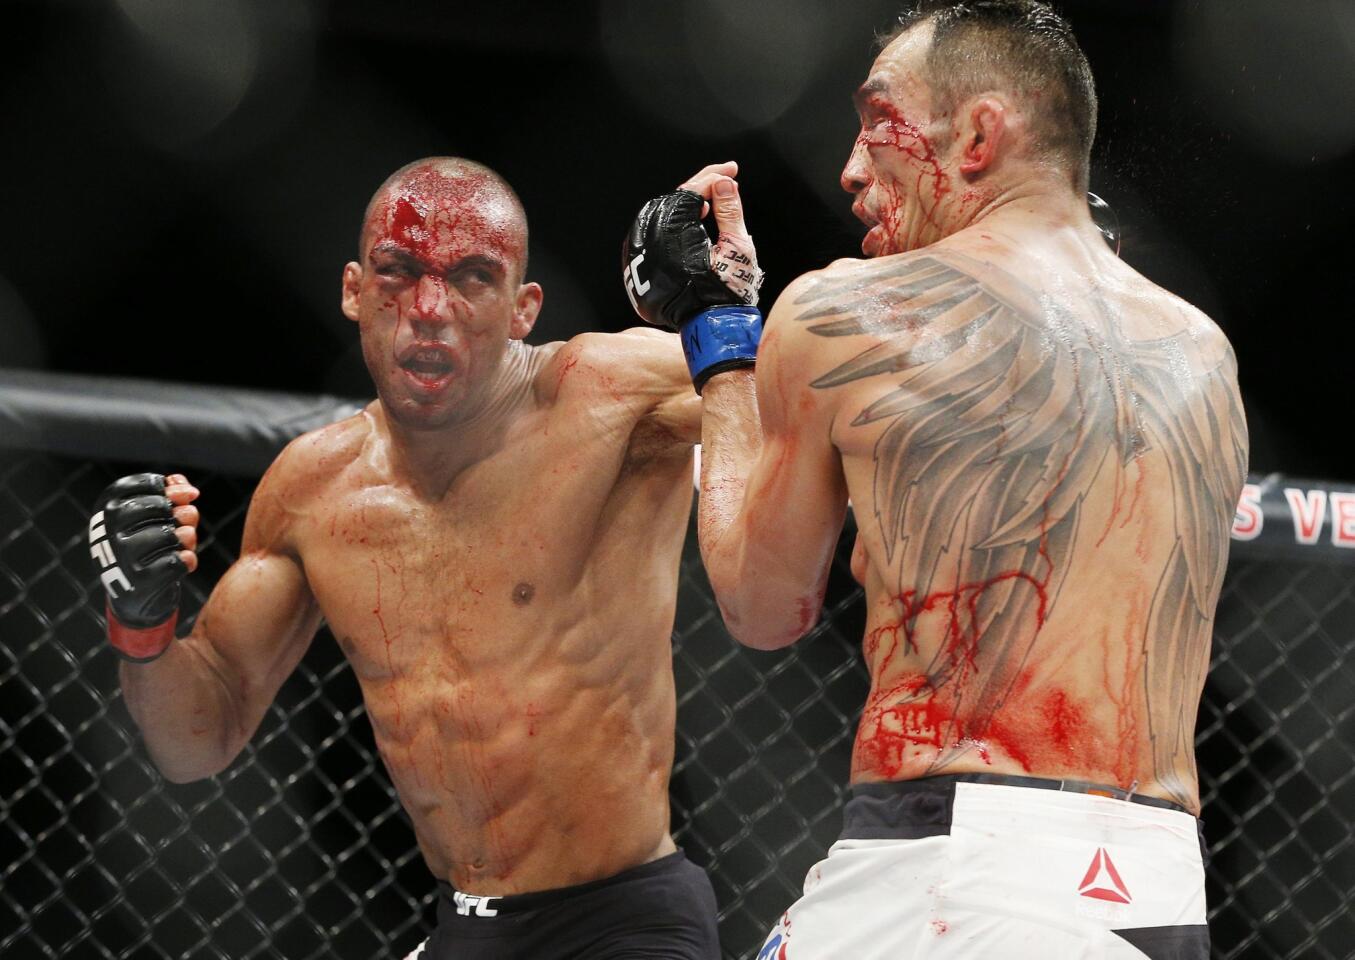 Edson Barboza, left, hits Tony Ferguson in a lightweight bout during The Ultimate Fighter finale Friday, Dec. 11, 2015, in Las Vegas. (AP Photo/John Locher)